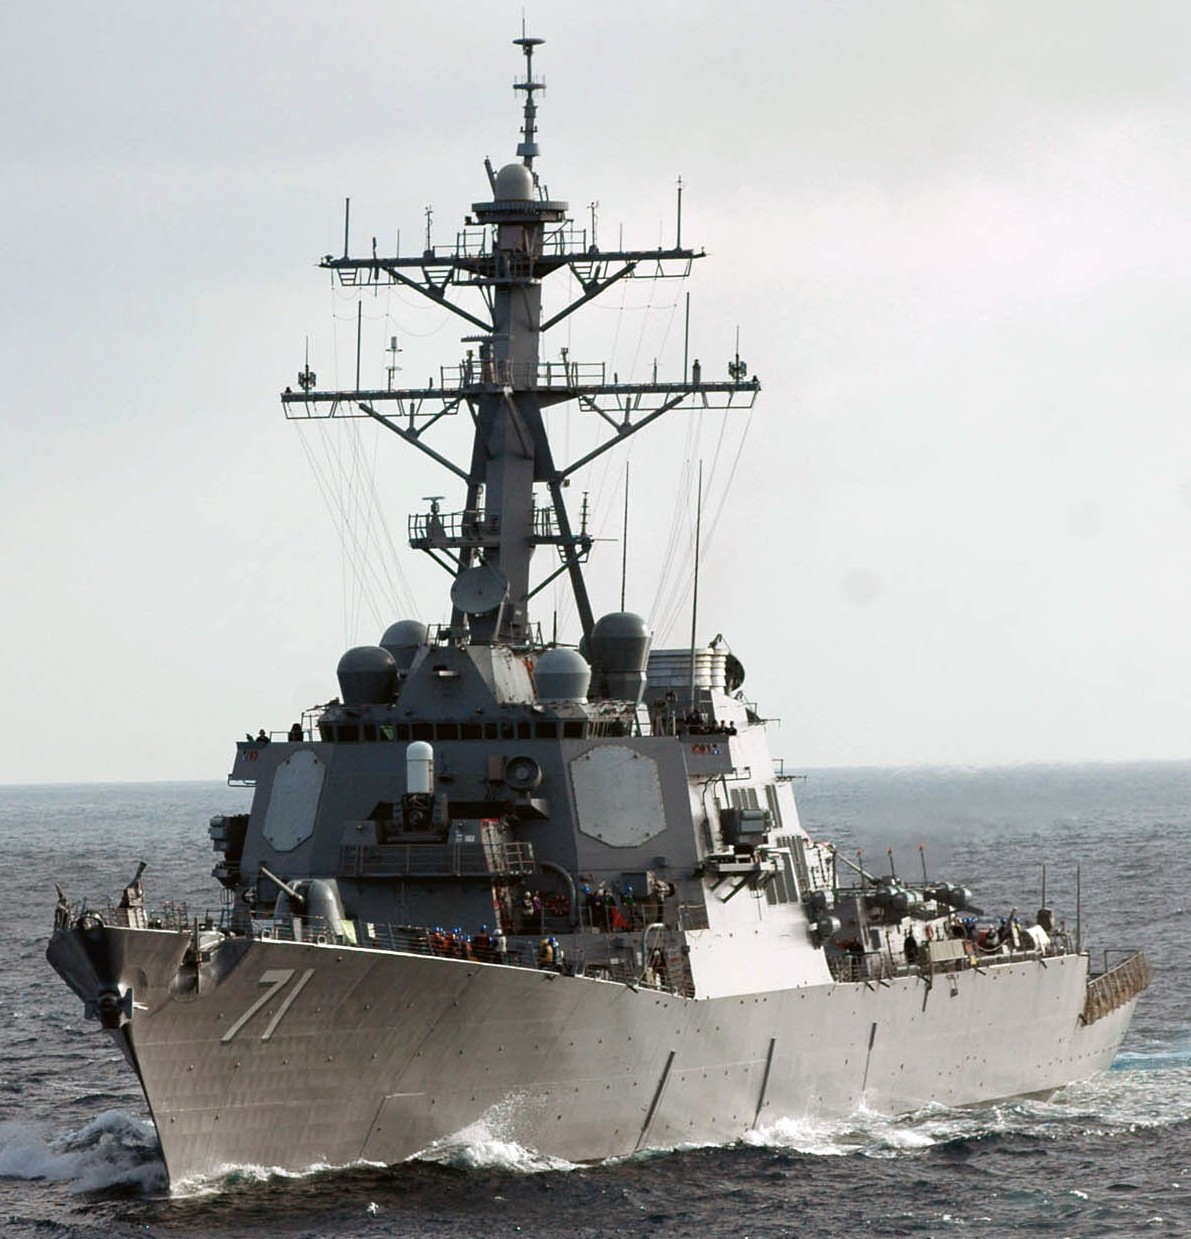 ddg-71 uss ross guided missile destroyer arleigh burke class aegis bmd 84